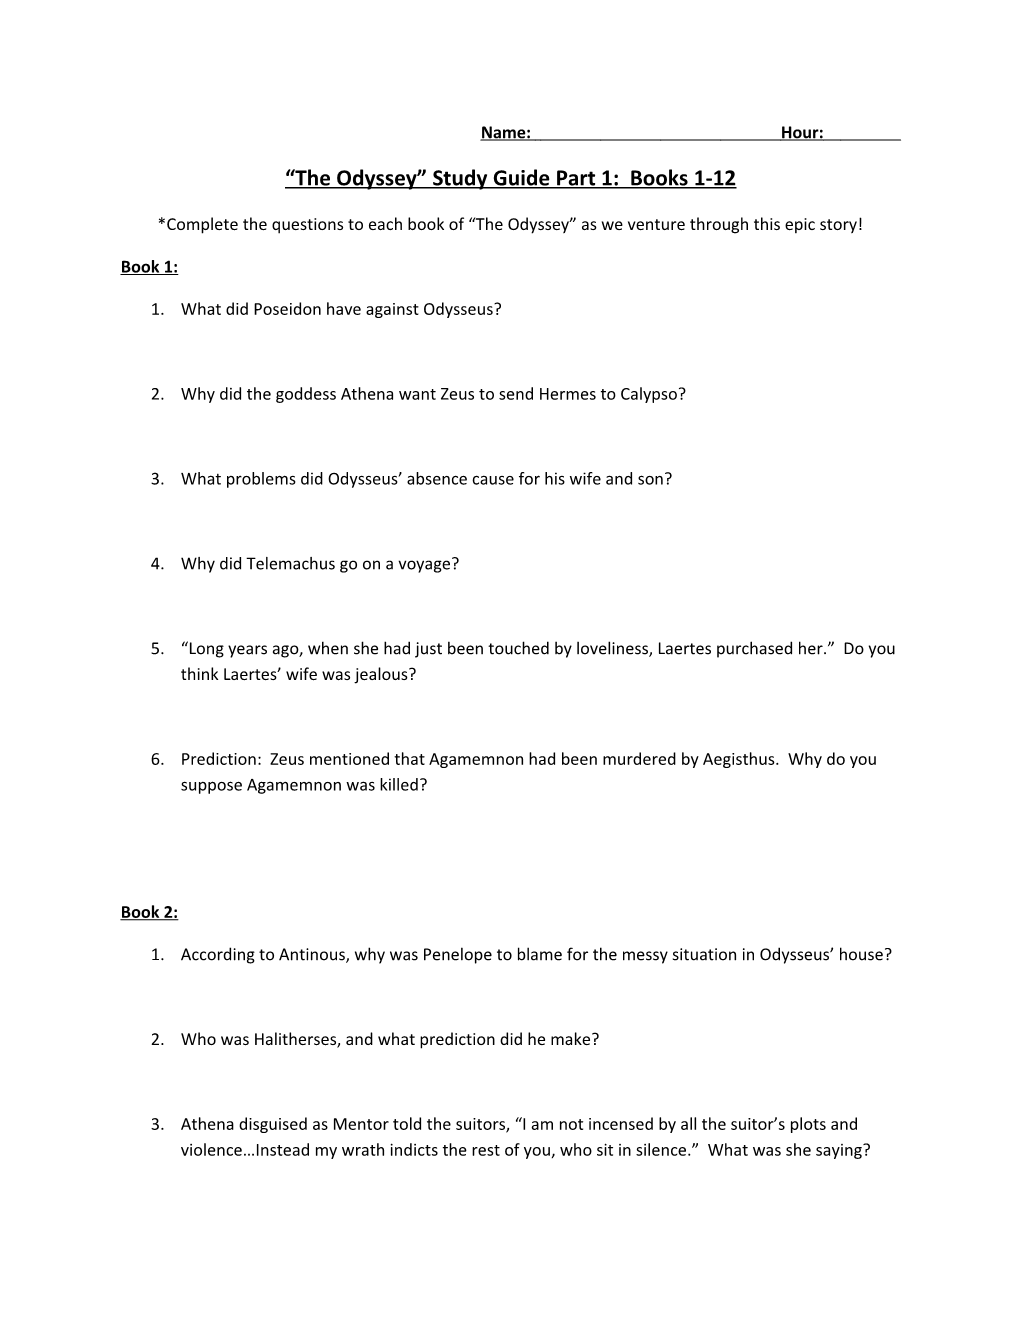 The Odyssey Study Guide Part 1: Books 1-12